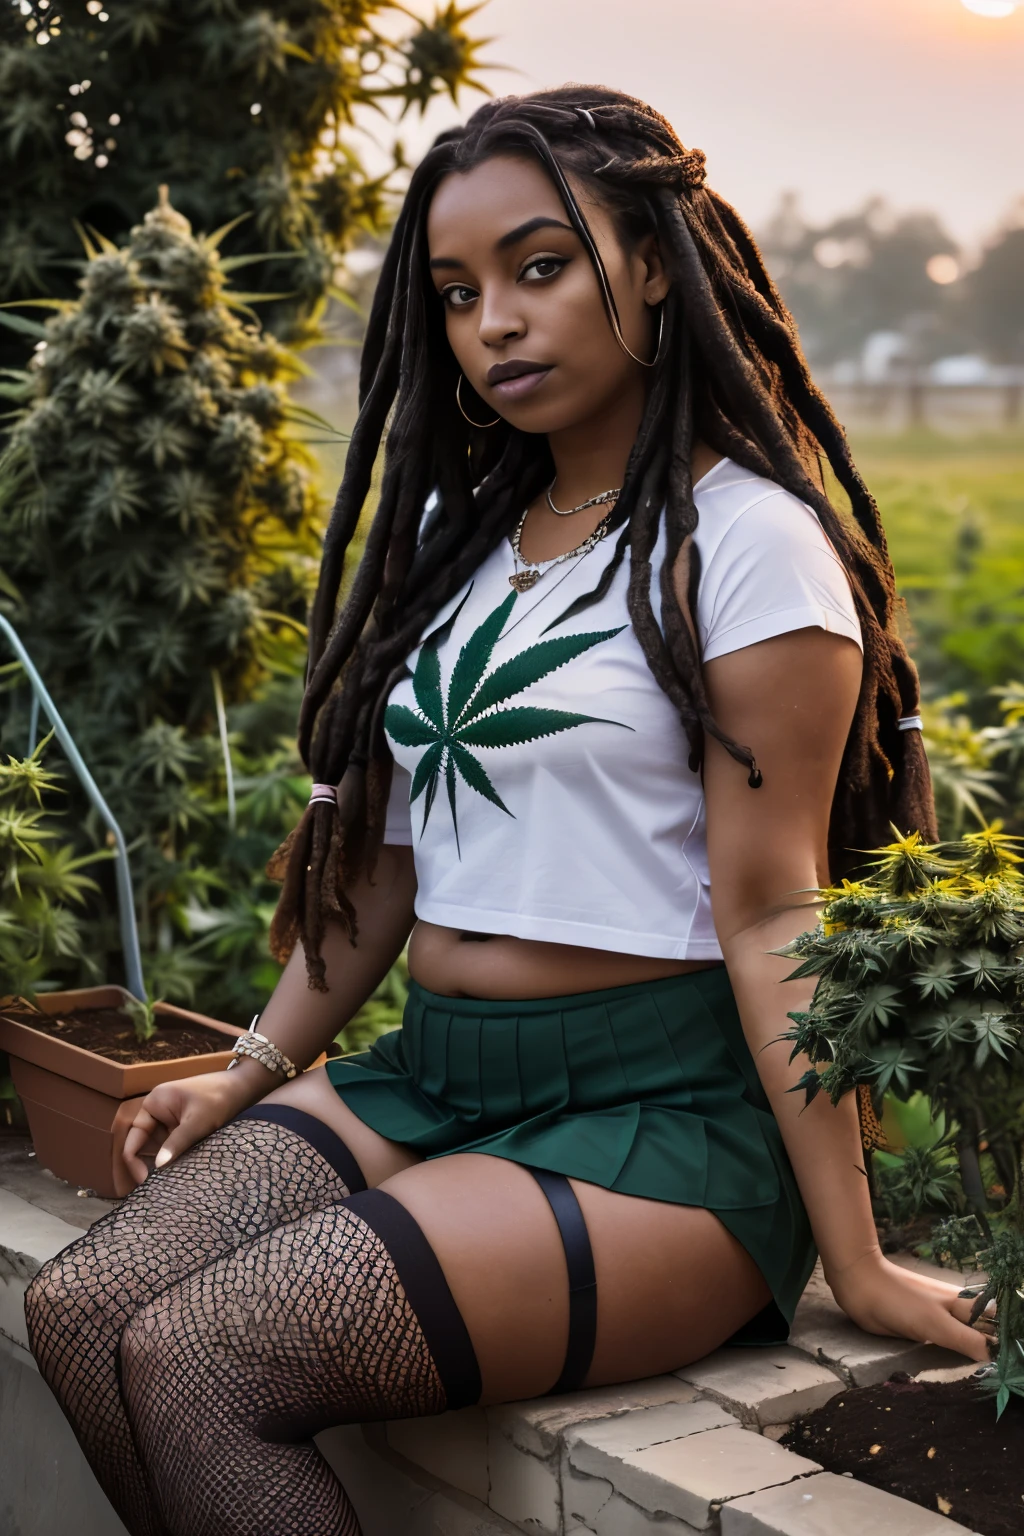 ((joyful ((chubby ((dark-skinned Nicaraguan)) goth girl with long freeform dreadlocks and hairy legs)) sitting in middle of garden while peacefully observing the sunrise, (wearing cropped punk T-shirt and pleated skirt with fishnet stockings), (wearing diamond necklace), (cannabis flower tattoos on arms and legs), plump legs spread apart, high quality photo, sitting quietly (with many cannabis sativa plants and juniper shrubs in garden during foggy sunrise)